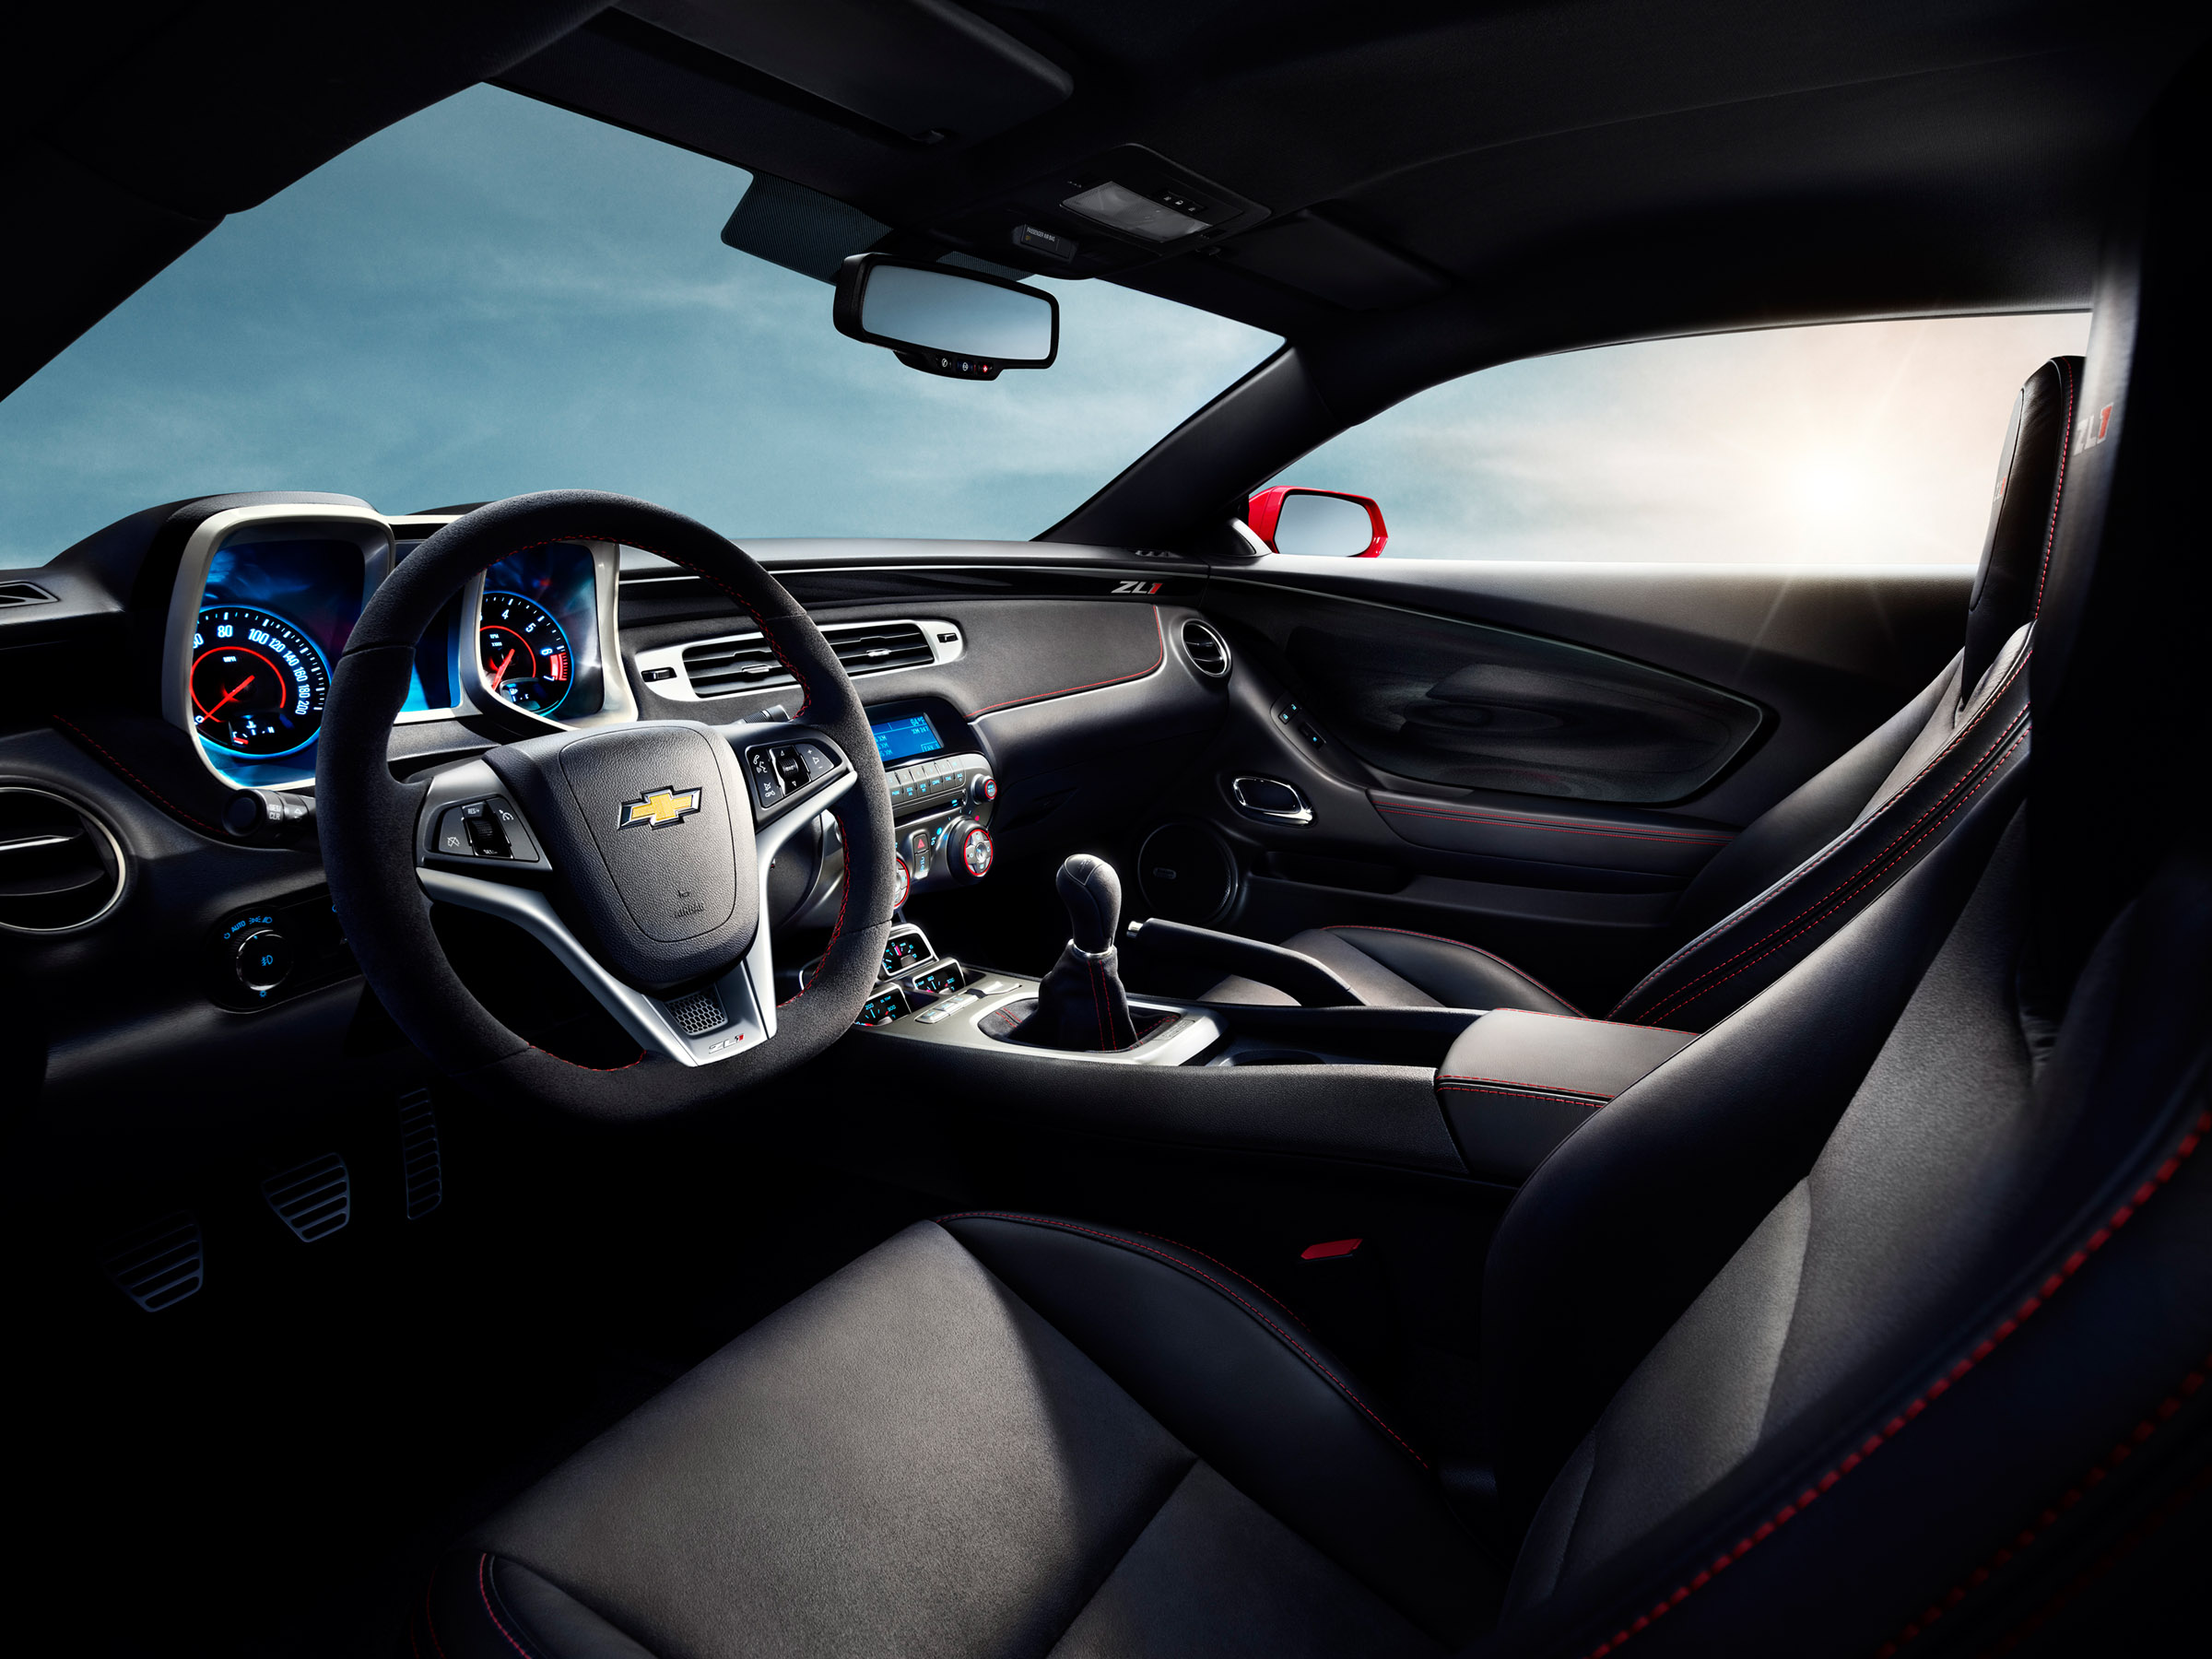 2012 Hennessey Chevrolet Camaro Zl1 Tuning Muscle Interior